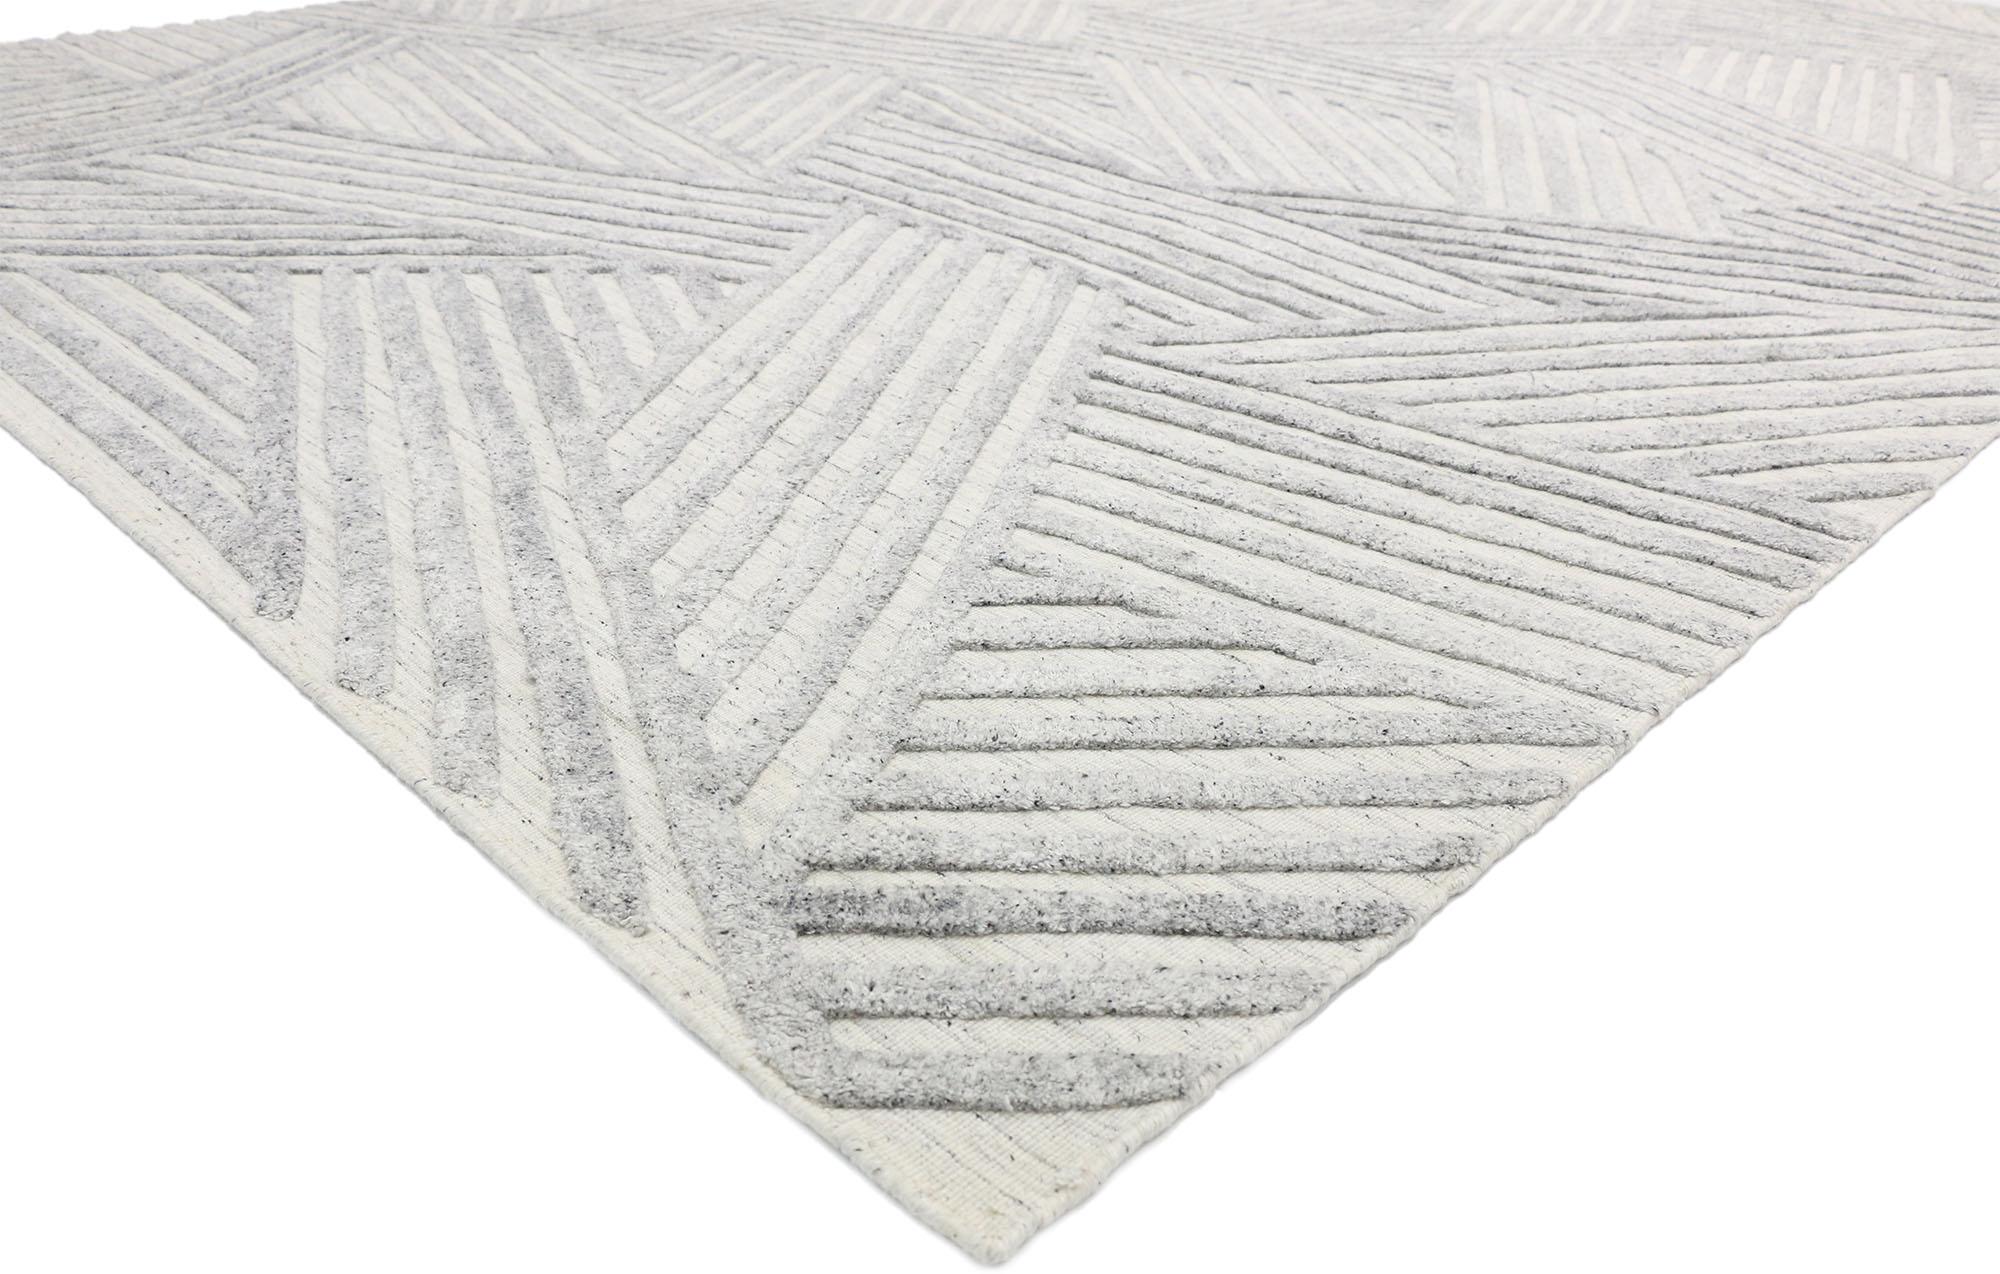 30422 Modern High-Low Textured Rug 09’00 x 11’10. Modern sophistication meets Zen in this textured high-low rug, creating a harmonious blend that focuses on simplicity, minimalism, and tranquility. This fusion combines the sleek, clean lines and